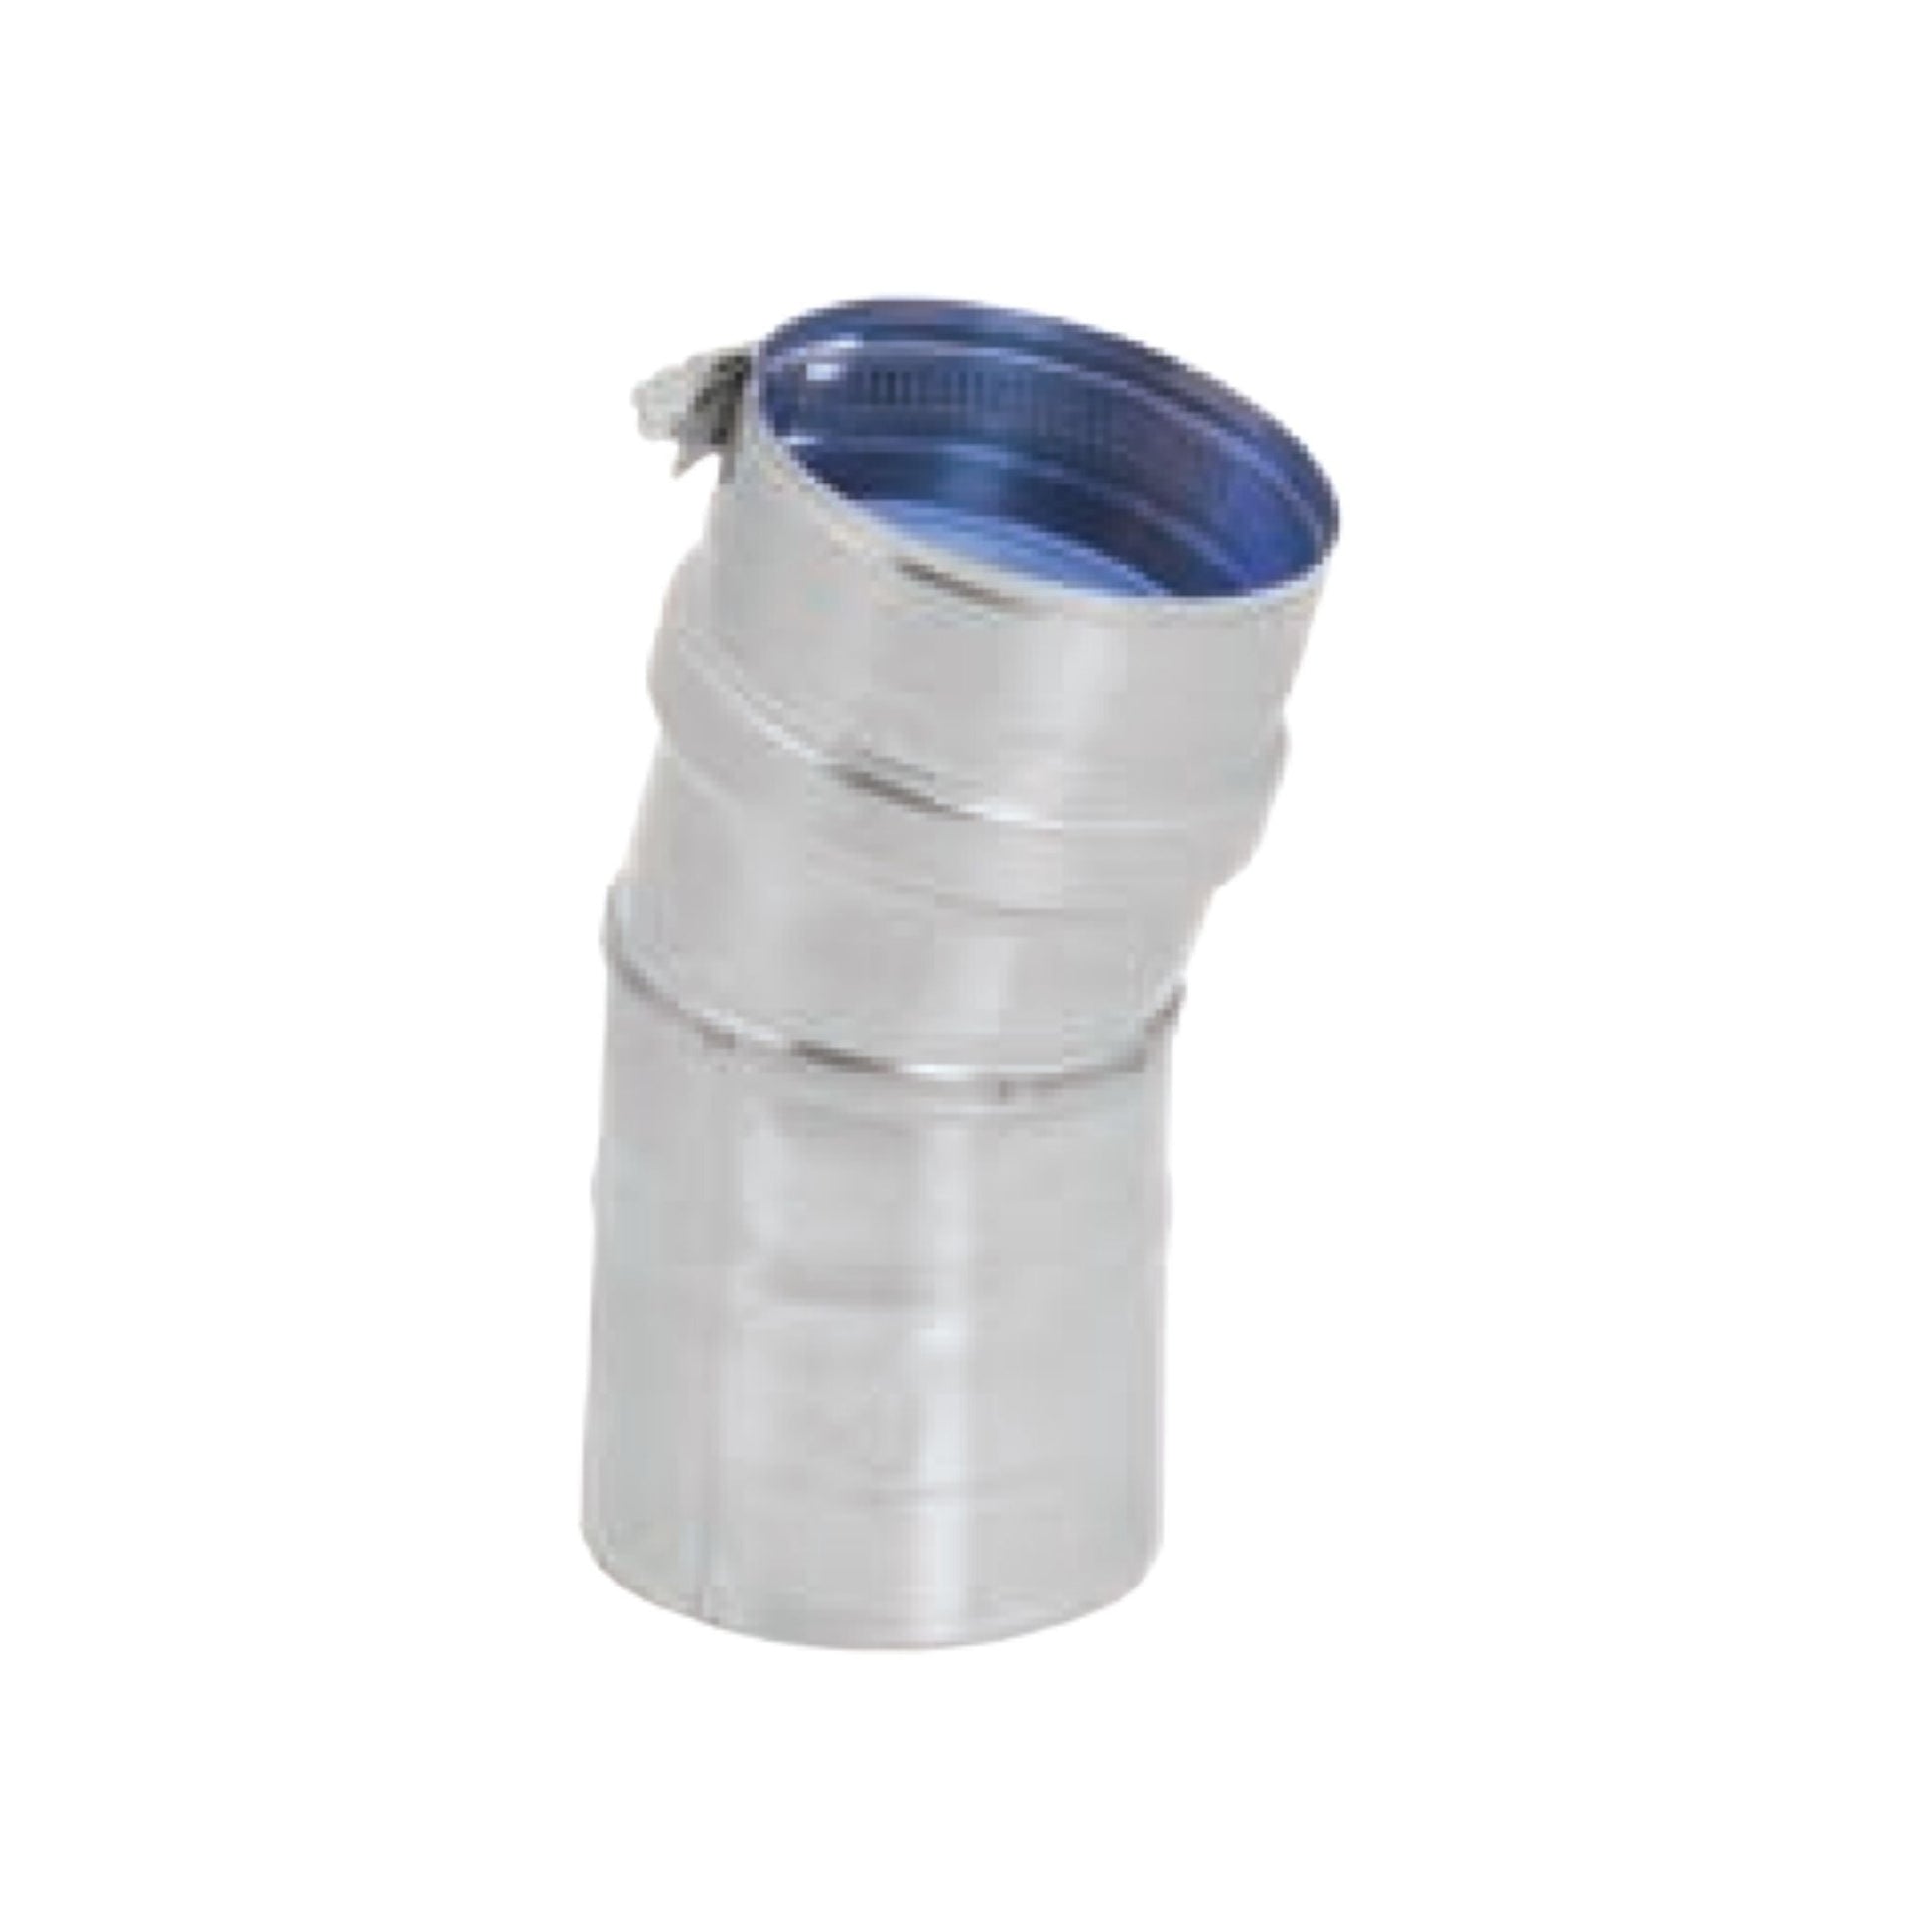 DuraVent FasNSeal 5" 15 Degree 316L Stainless Steel Elbow